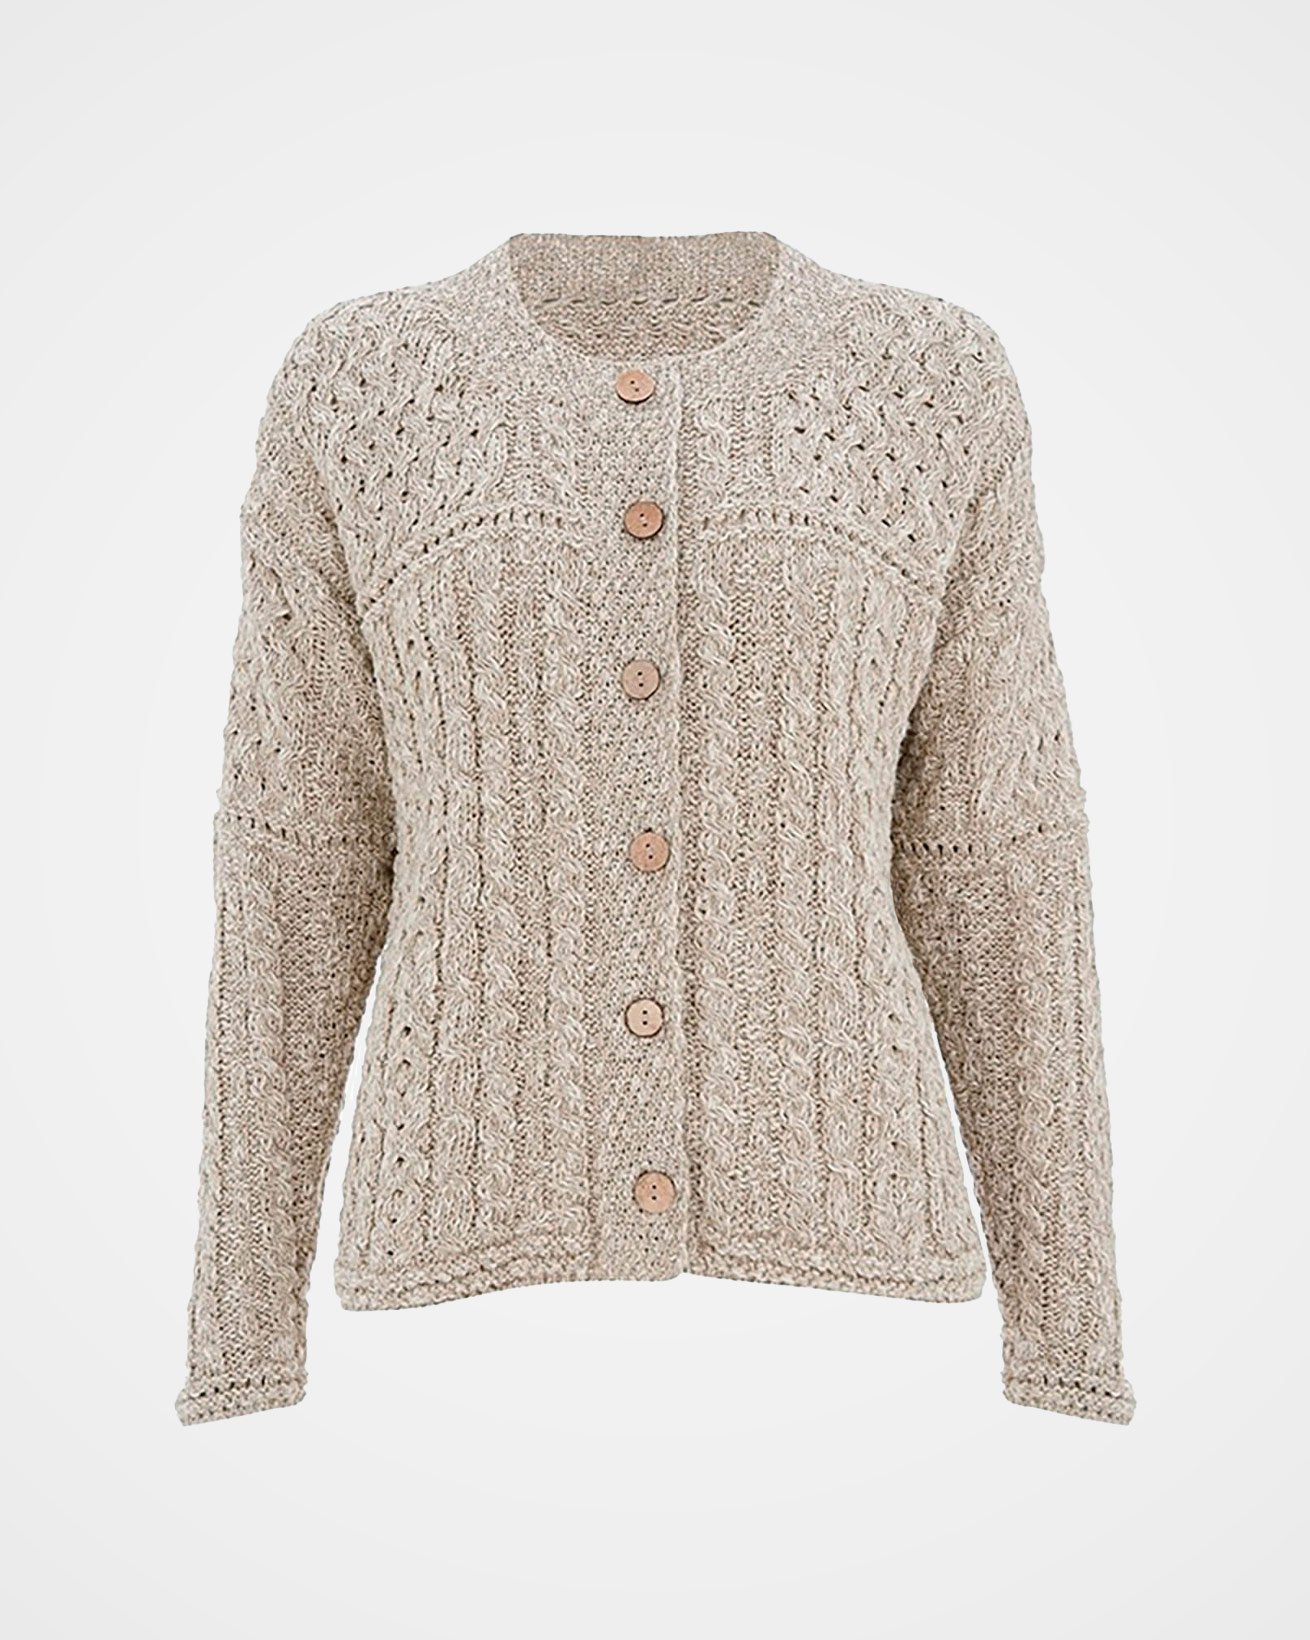 6975_knitted-linen-cardi_natural_front.jpg